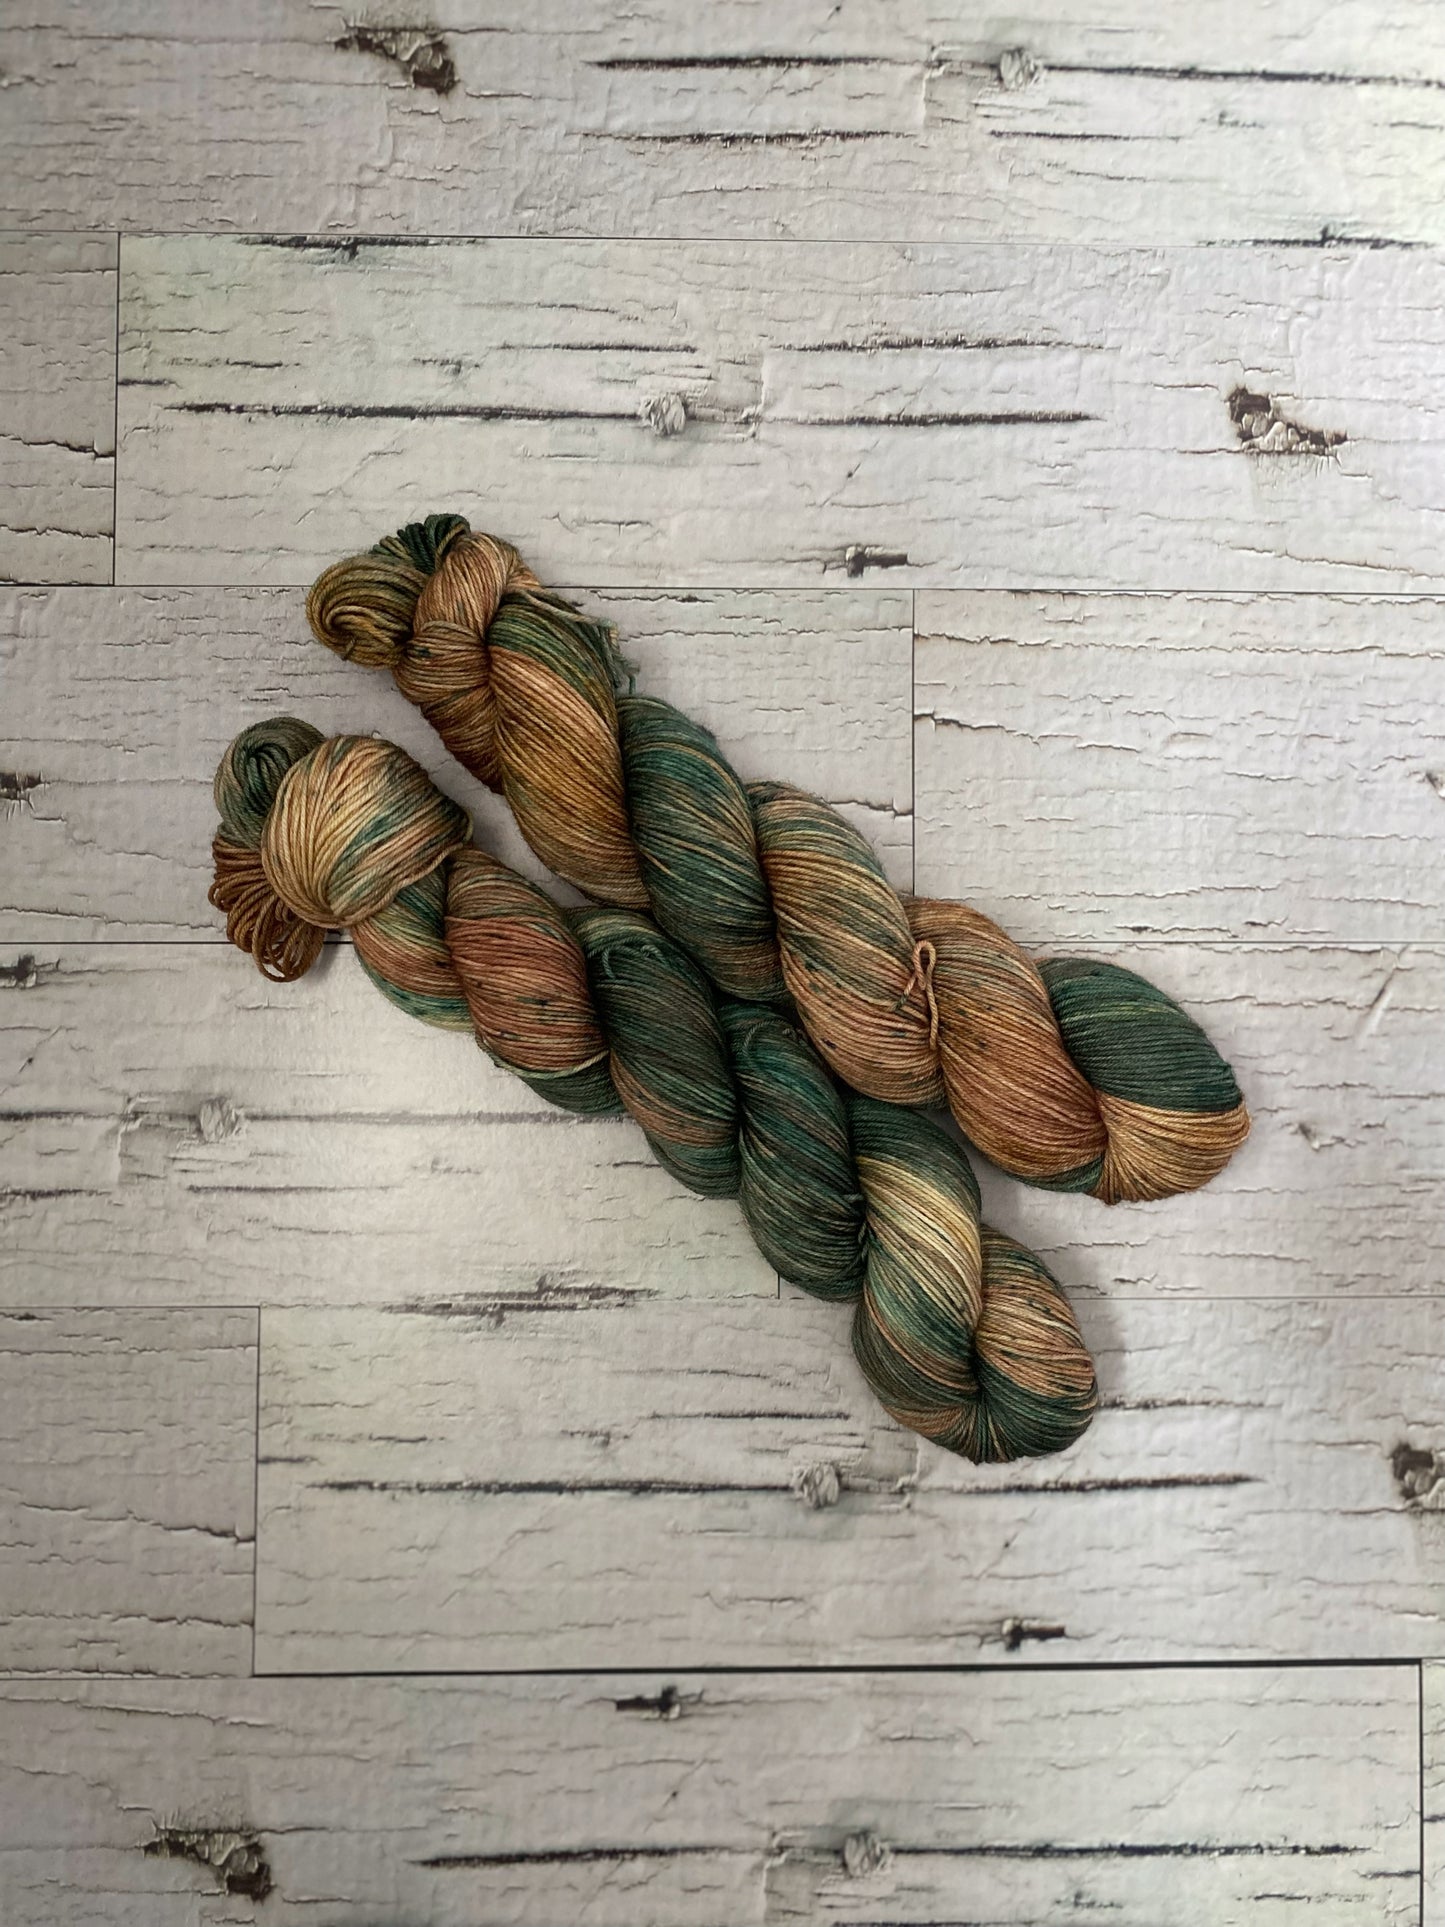 Two skeins of brown and green variegated yarn.